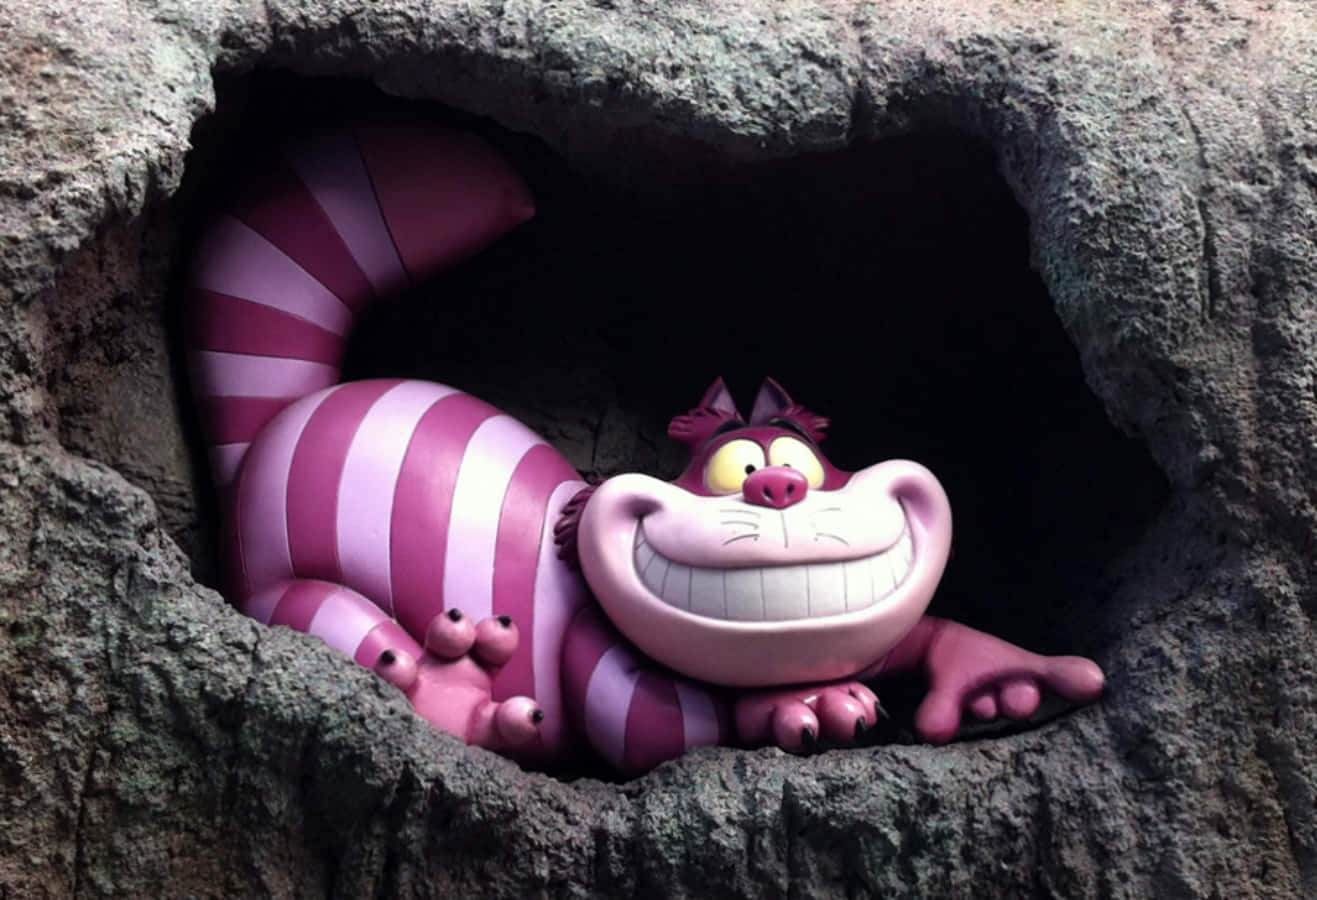 A curious Cheshire Cat peers out from a vivid, dream-like world.